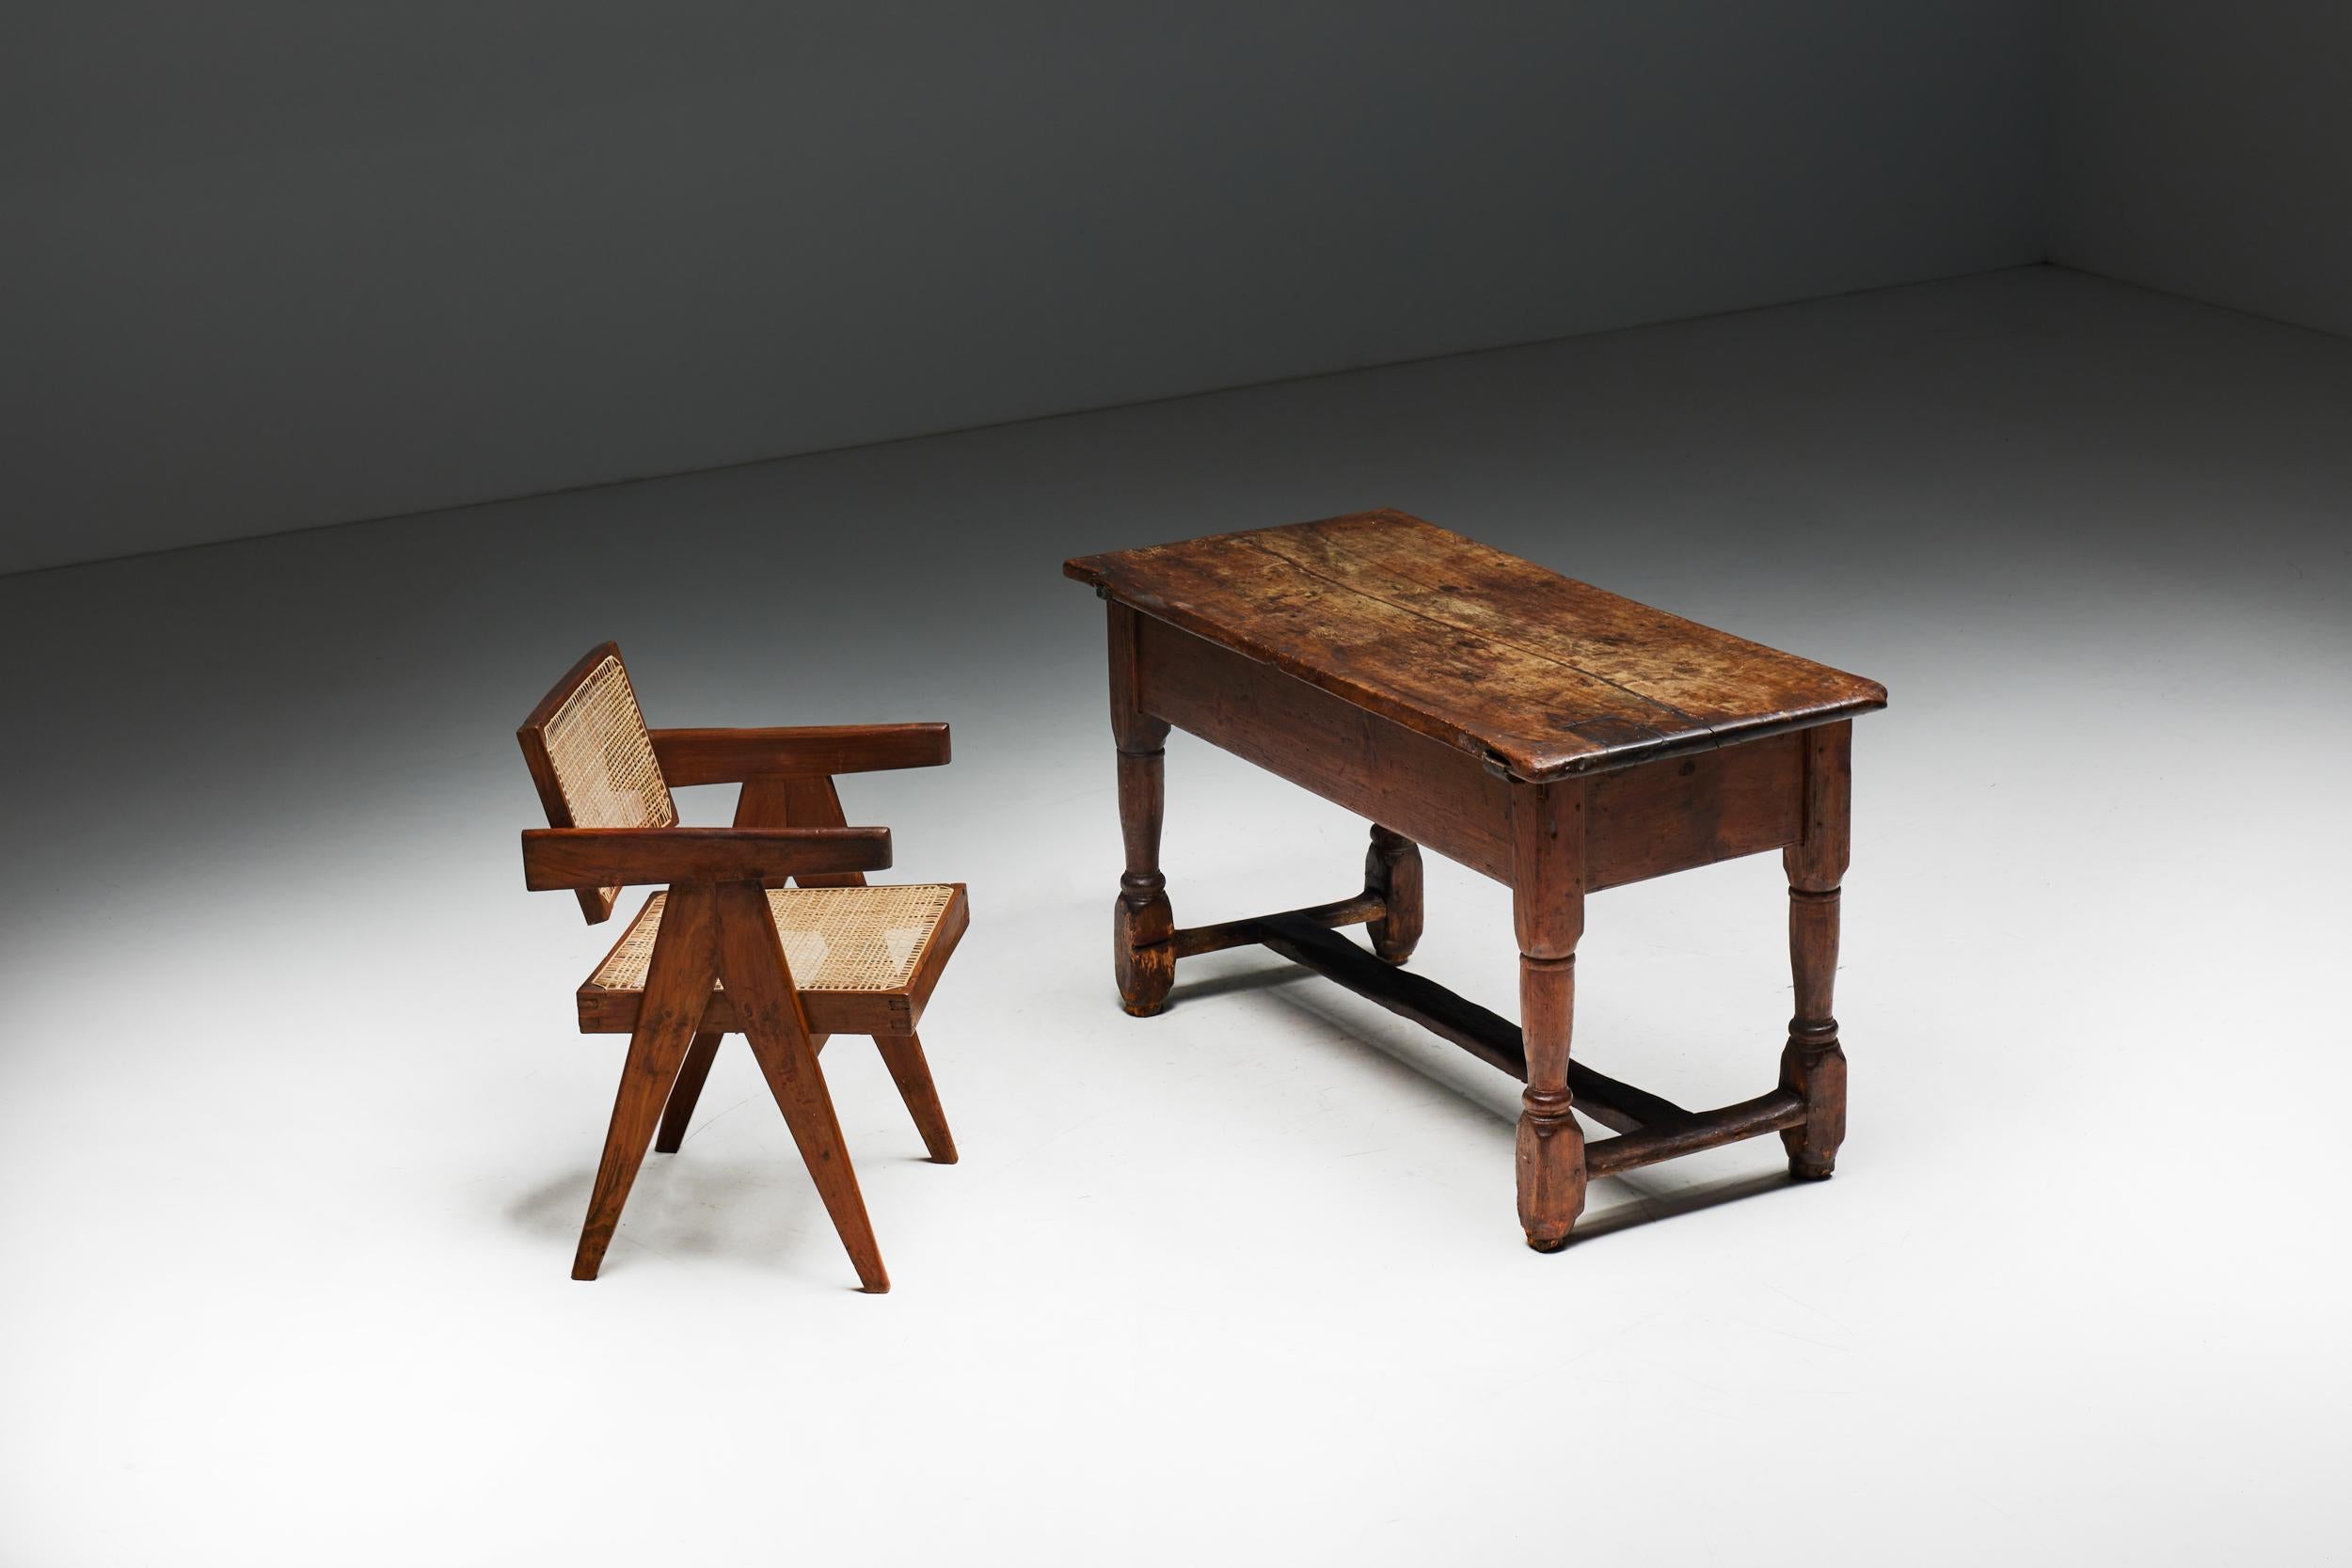 Wooden Desk; Writing Table; France; 19th Century Design; Art Populaire; Rustic; Monoxylite; Writing Desk; Table; France; Wabi Sabi; Naive; Folk Art; Travail Populaire;

19th-century console or writing table, a true testament to the rich heritage of